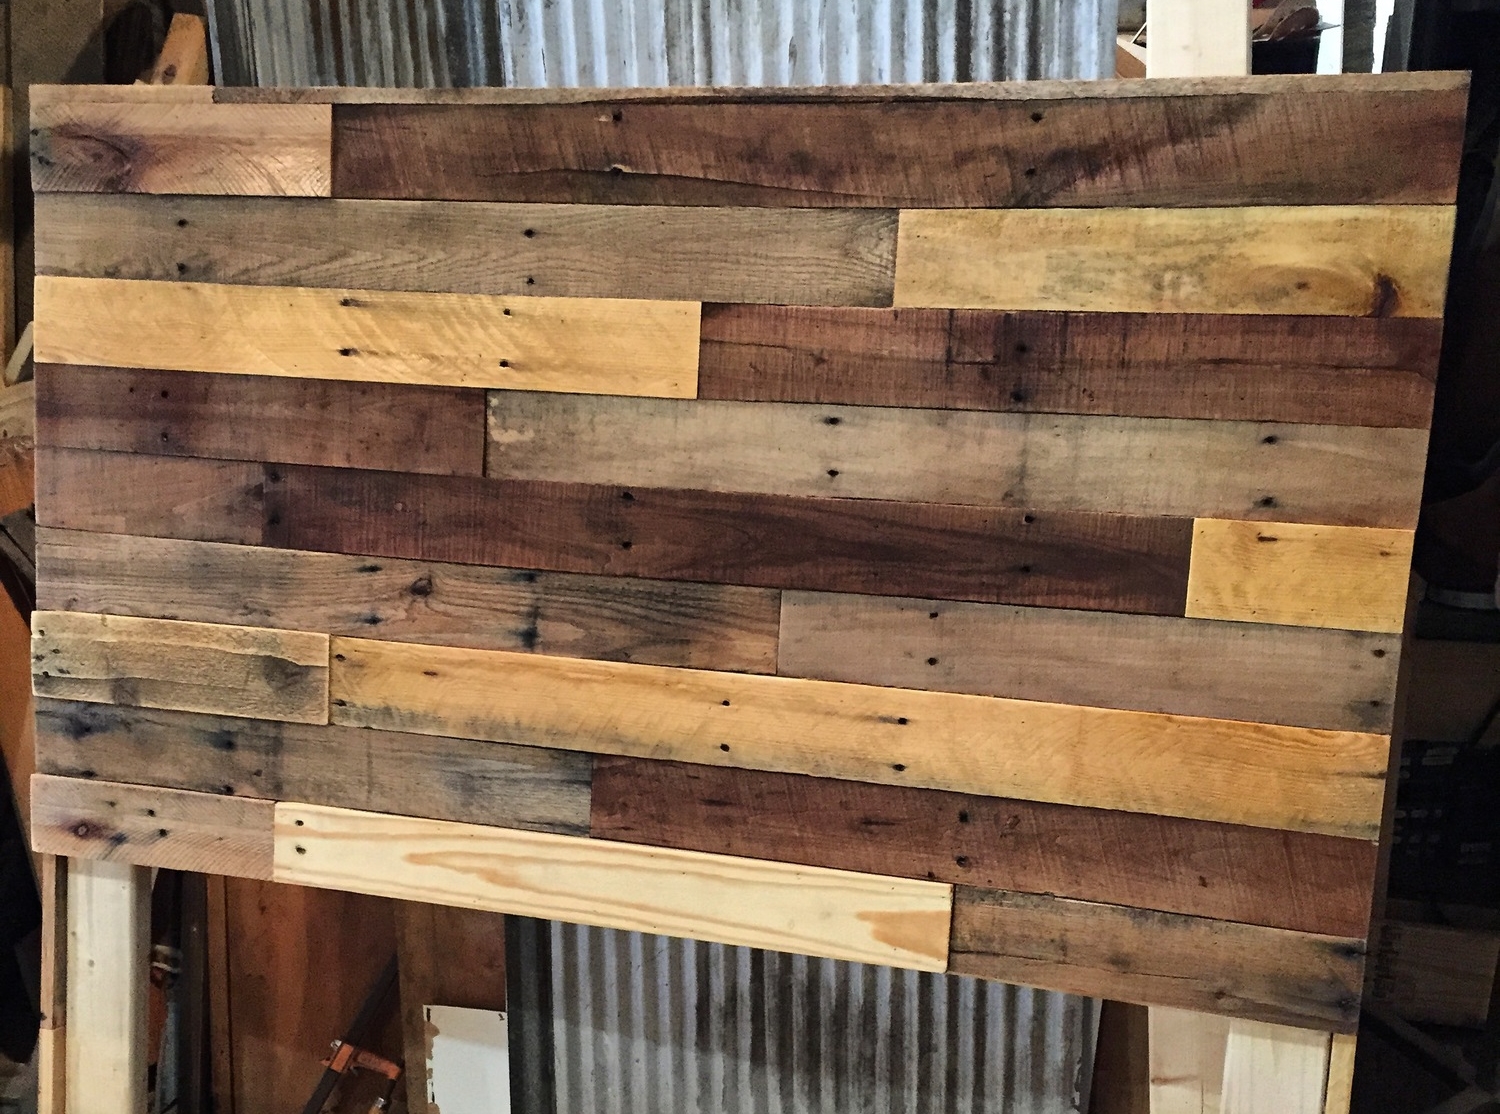 Pallet Wood Headboard Diy Revival, How To Make A Bed Frame Out Of Pallets